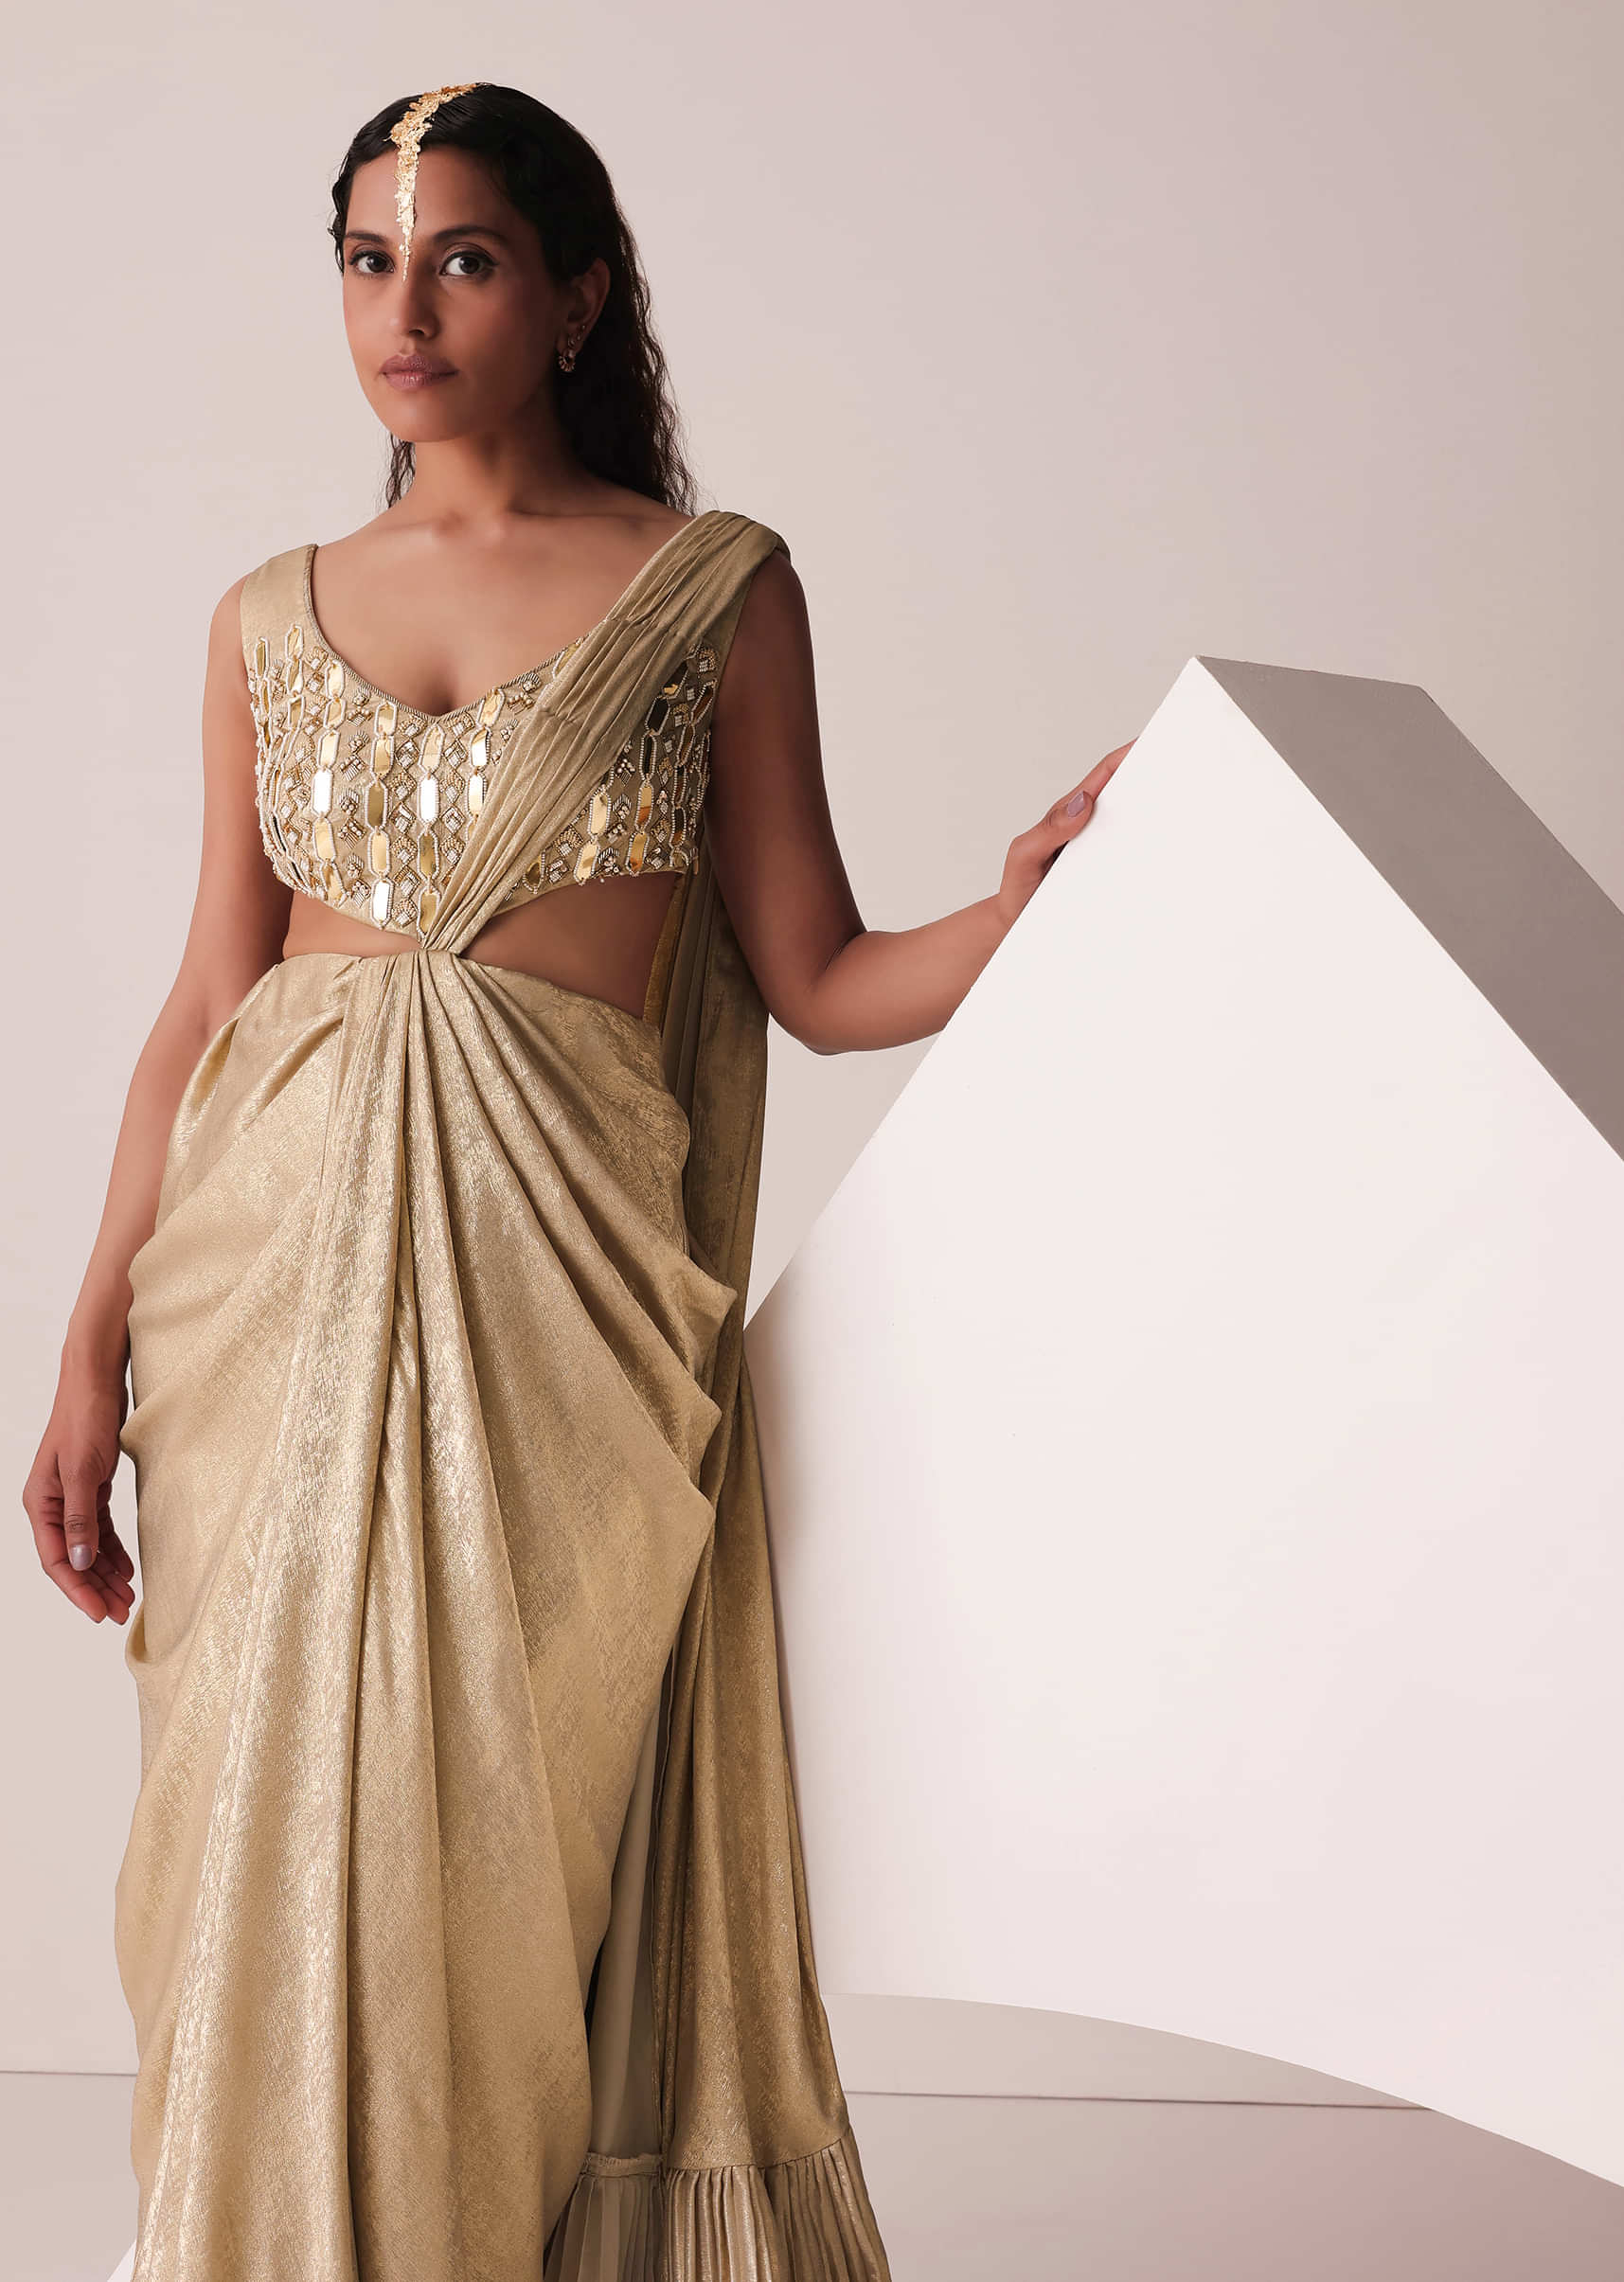 Saree Gowns Combine the Elegance of the Saree with Modern Western Designs,  and the Results are Stunning. 10 Saree Gowns for When You Want That Extra  Edge (2020)